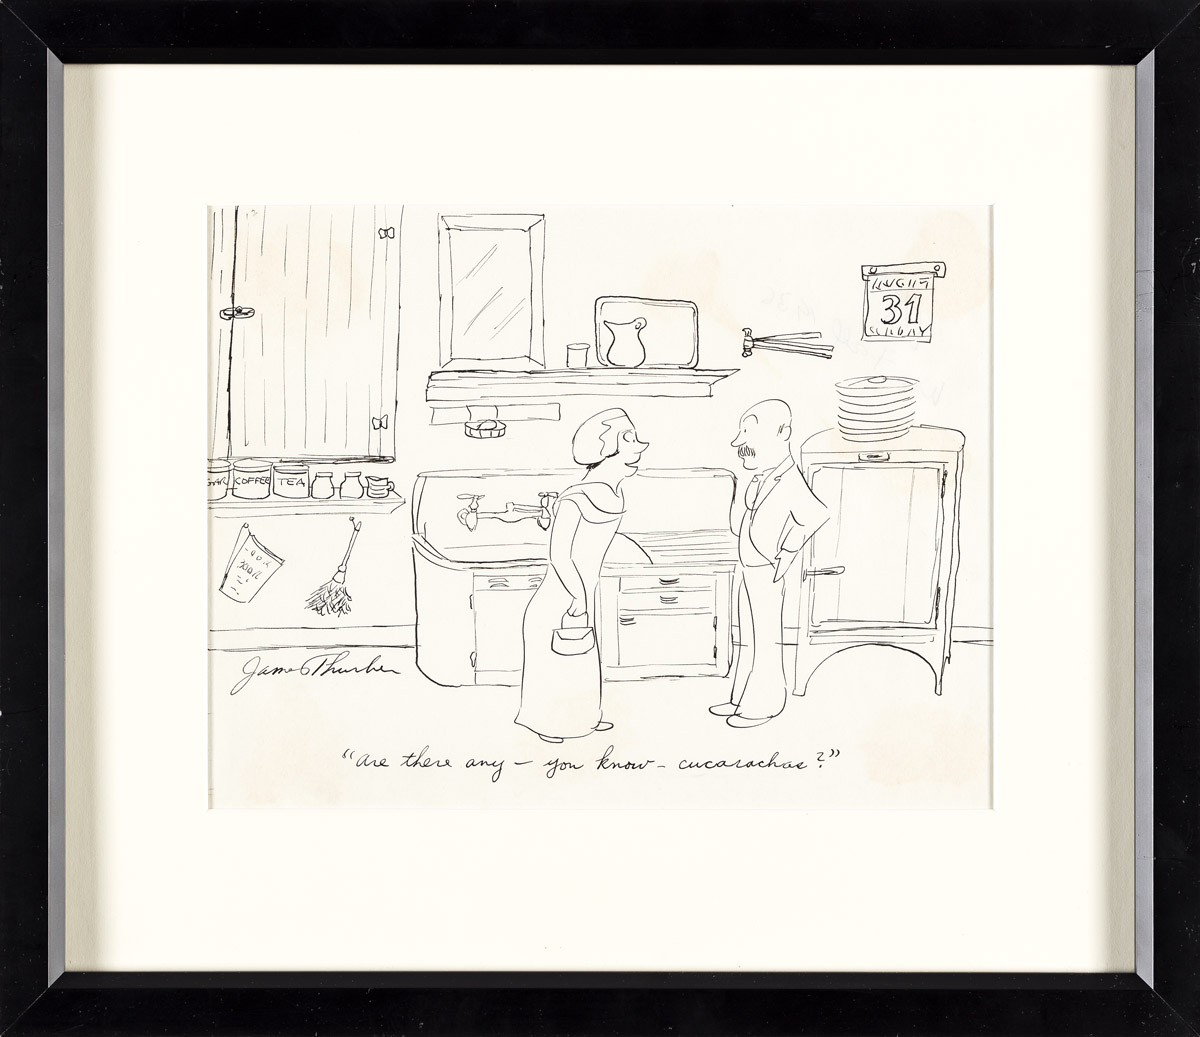 (THE NEW YORKER) JAMES THURBER (1894-1961) Are there any - you know - Cucarachas?